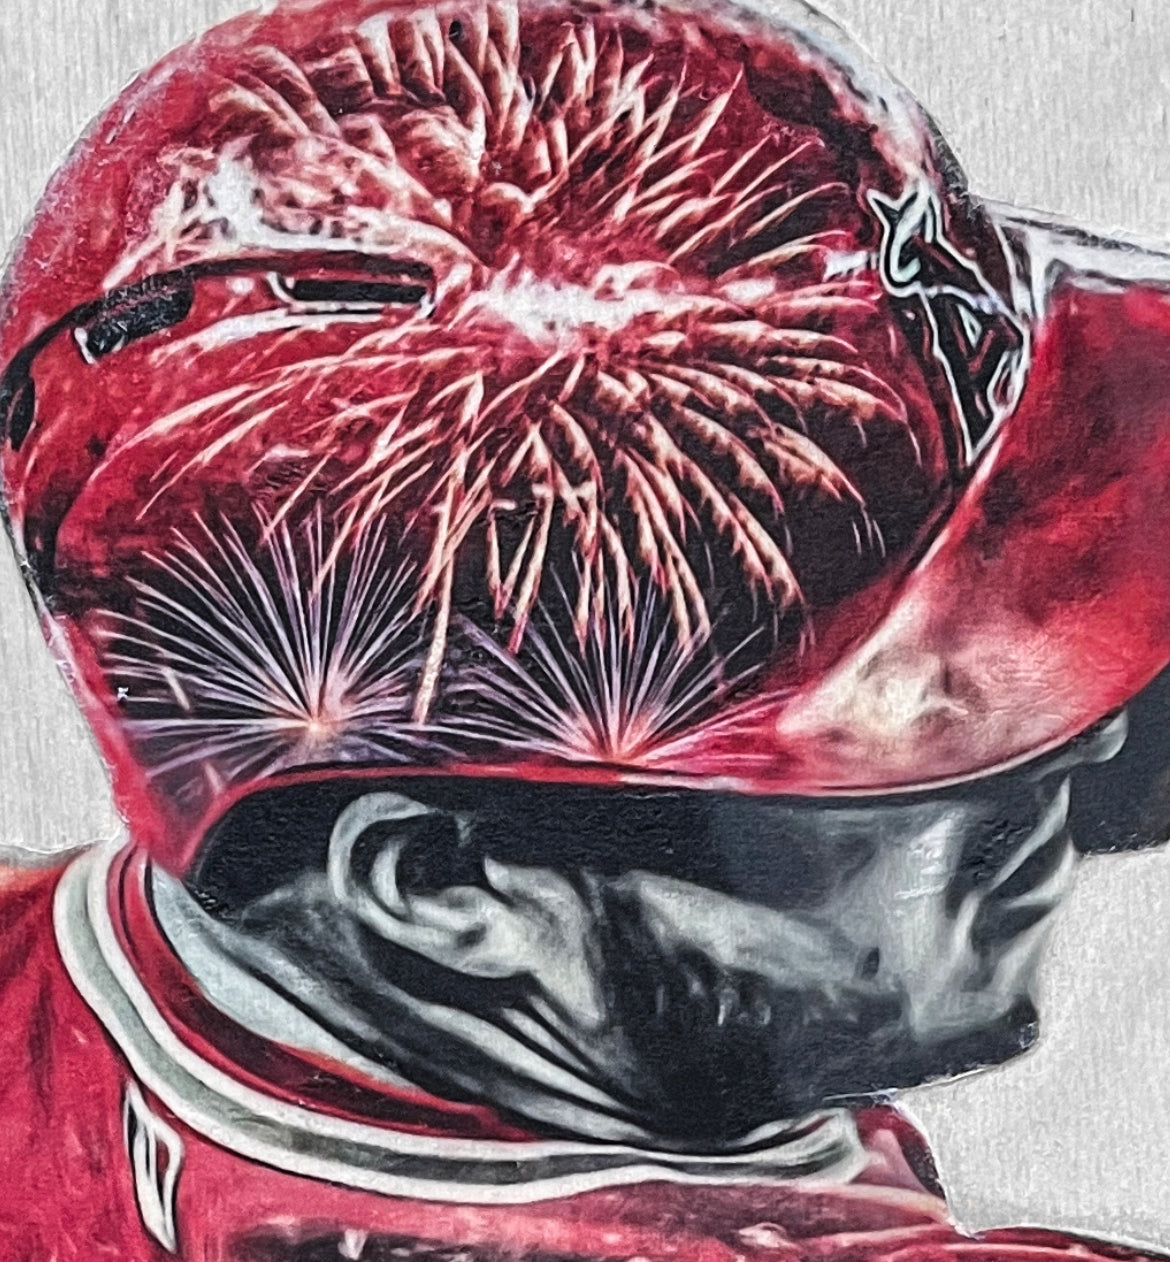 "King Fish 2.0" (Mike Trout ) Los Angeles Angels - 1/1 Original on Wood